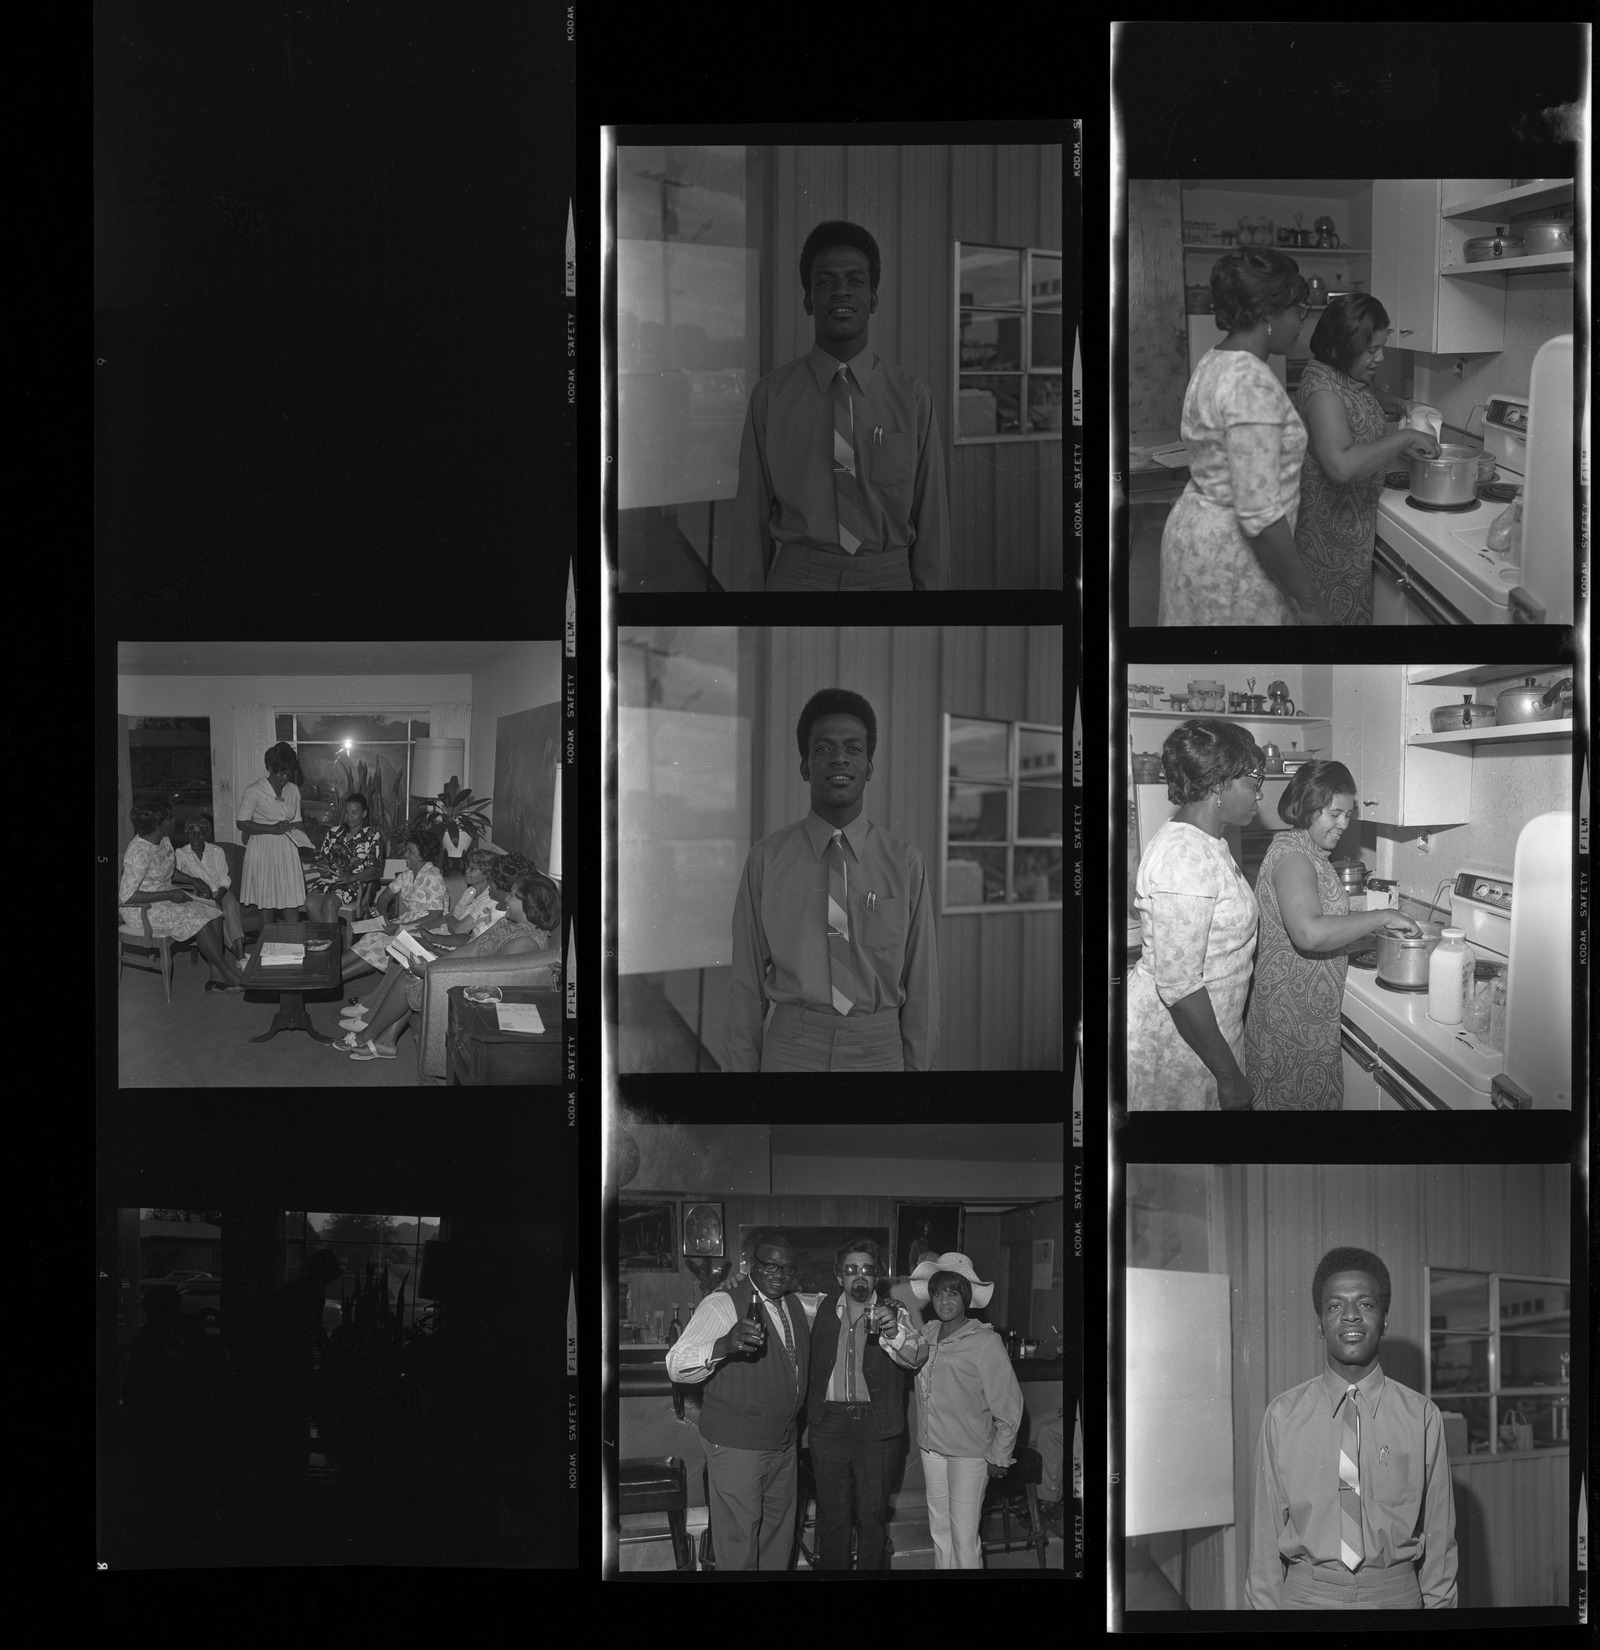 Set of negatives by Clinton Wright including El Rio Club, Wolfman Jack, salesman at Ford, and Home Extension Program, 1970, page 1